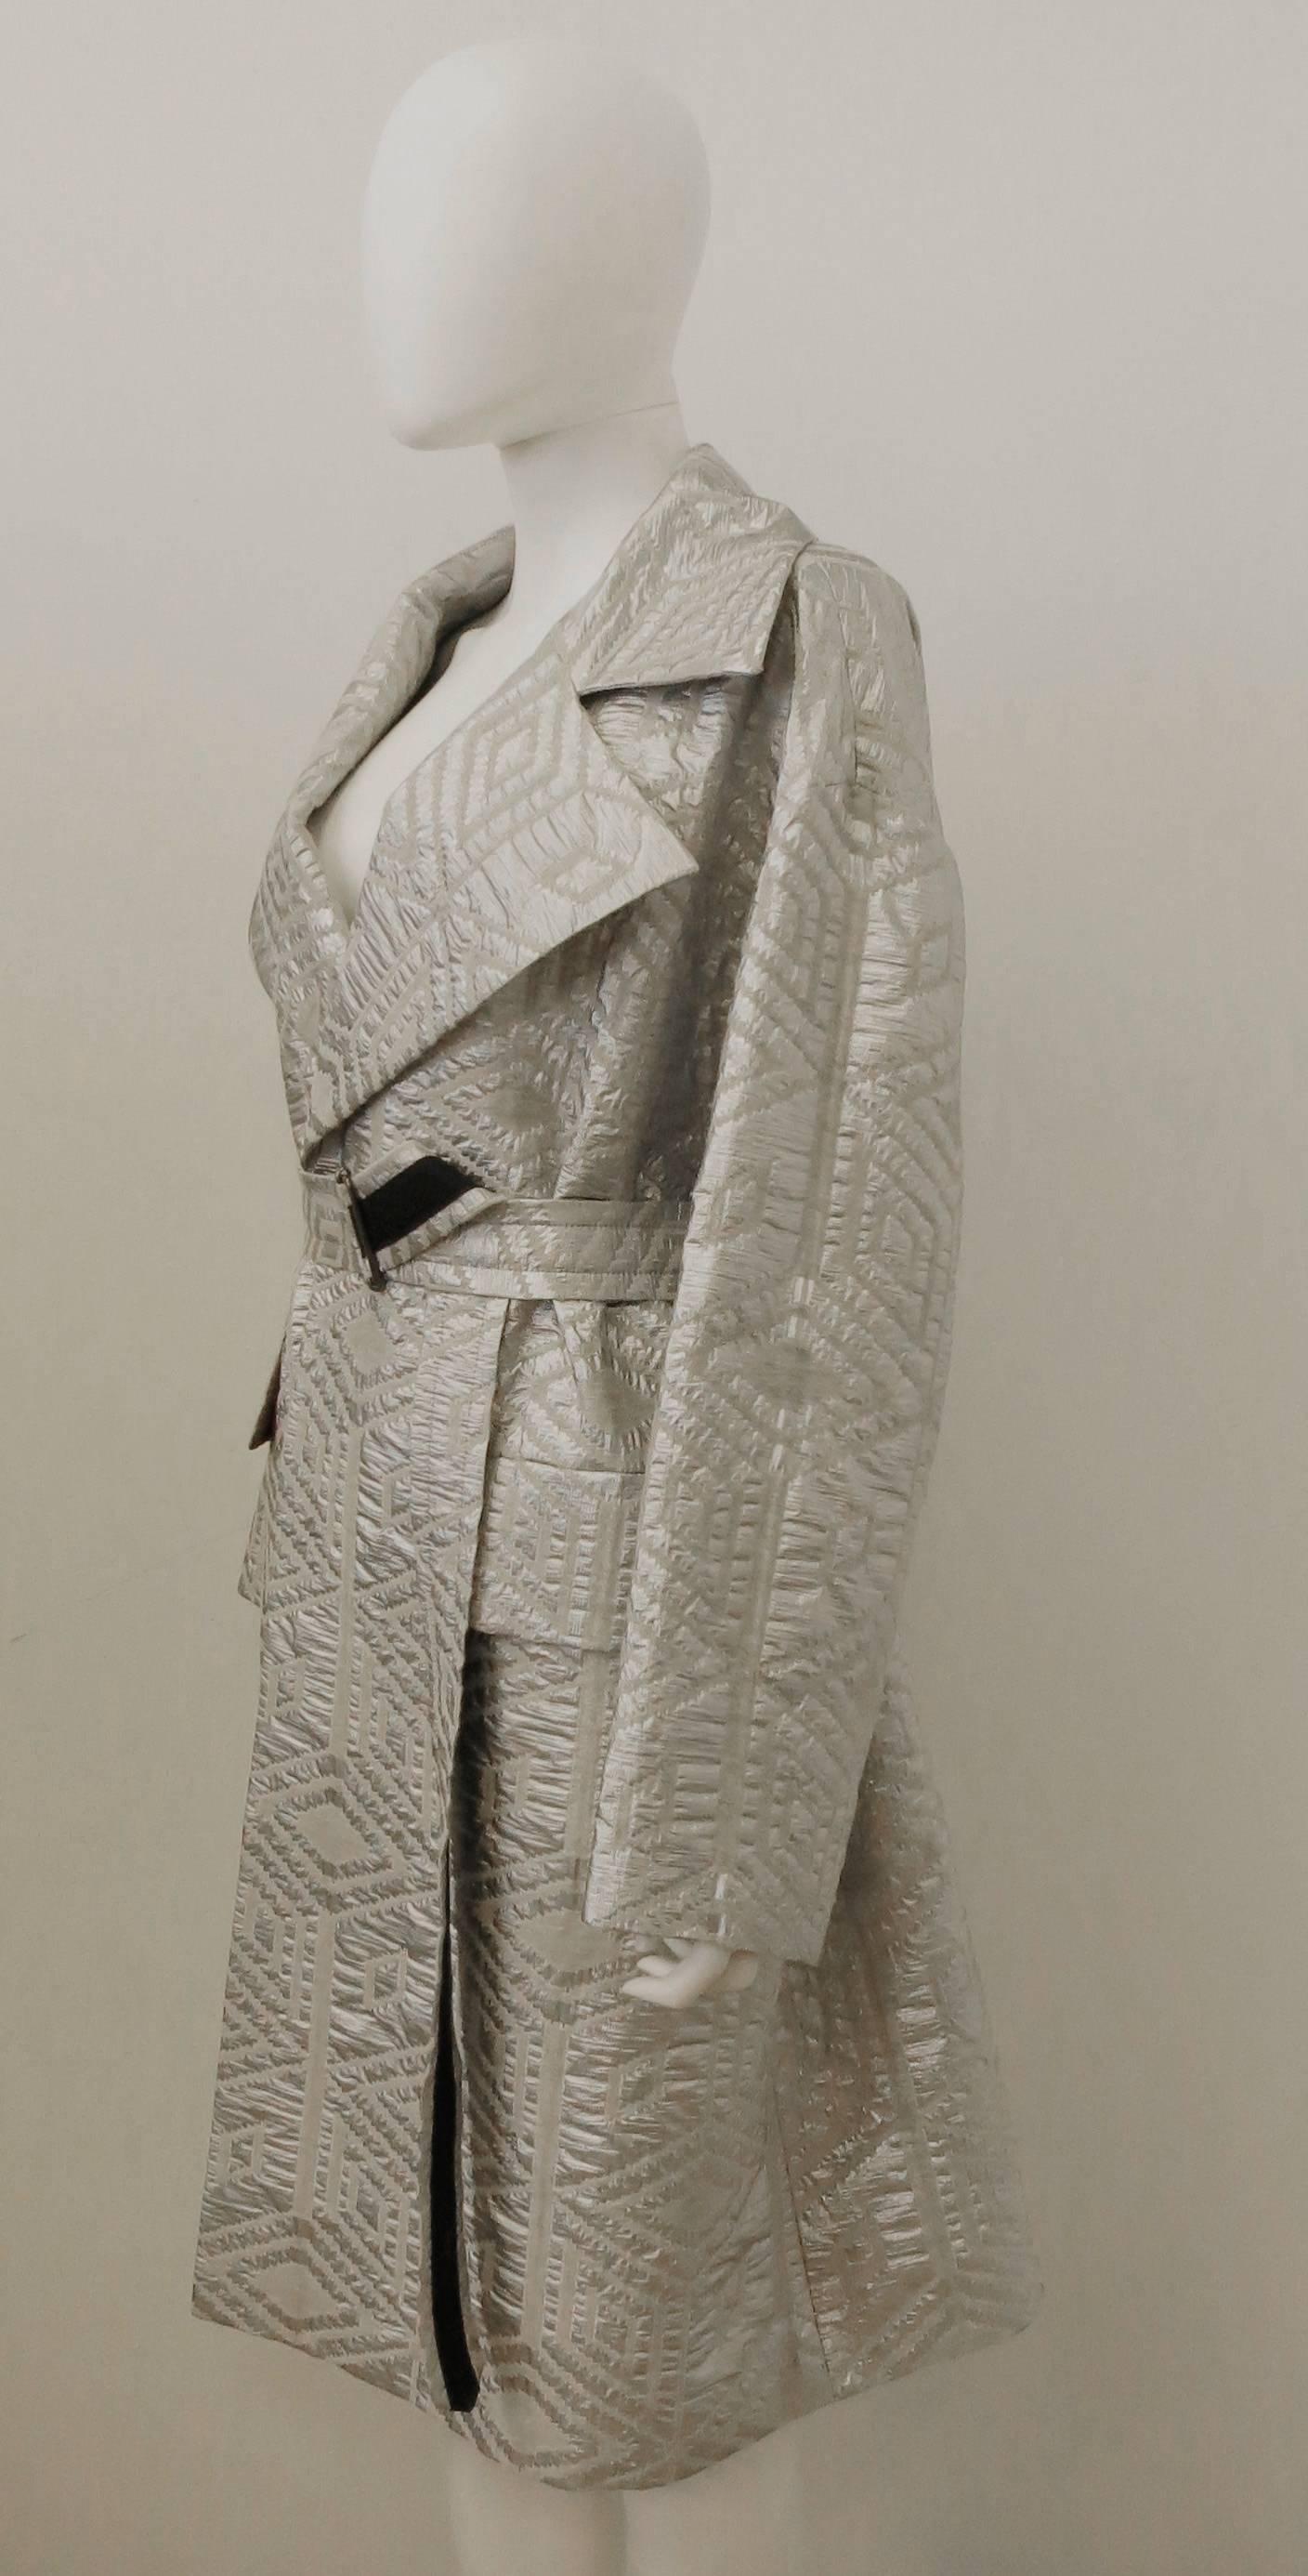 An oversize silver brocade coat from the Autumn/Winter 2014 Dries Van Noten collection. The coat has a long length with a large oversize collar, voluminous shape and attached belt. The coat is made from a wool and synthetic blend metallic brocade in